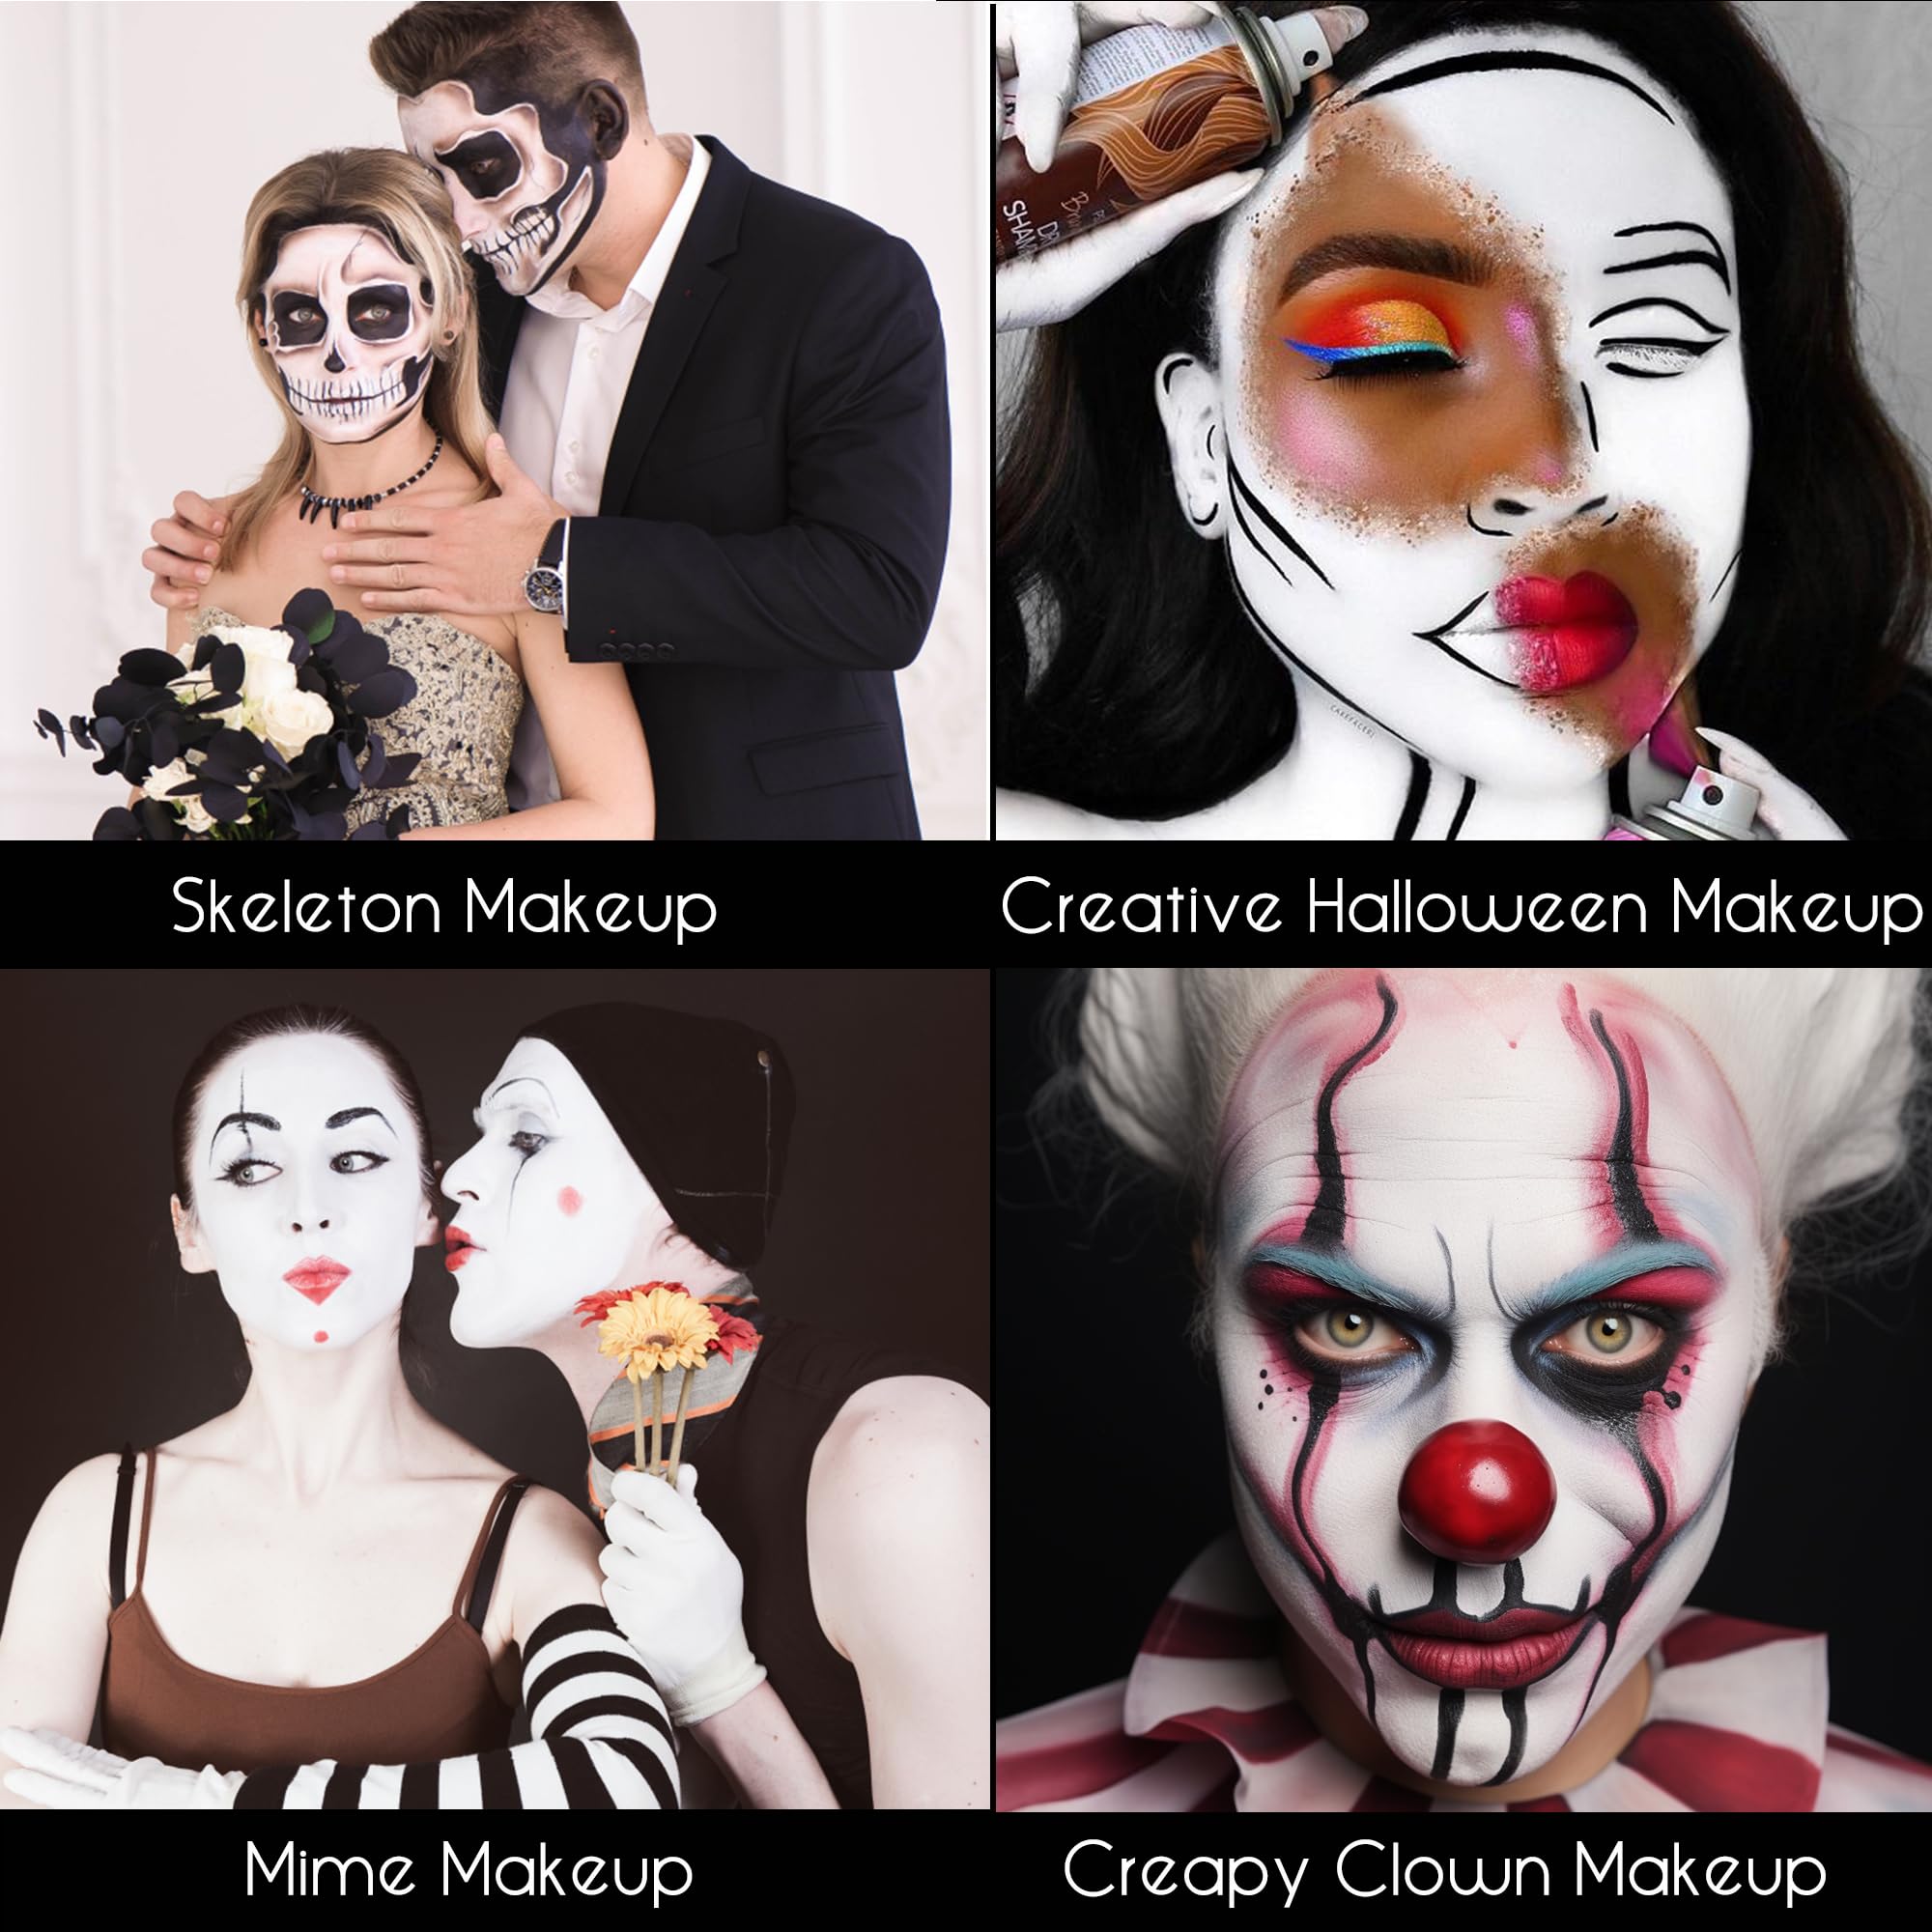 CCbeauty 7.4oz Halloween Clown Makeup, Large Black White Face Body Paint Set with 10 Sponges Non Toxic Dress Up Face Painting Kit for Adult Mime Skeleton Skull Costume Cosplay Makeup